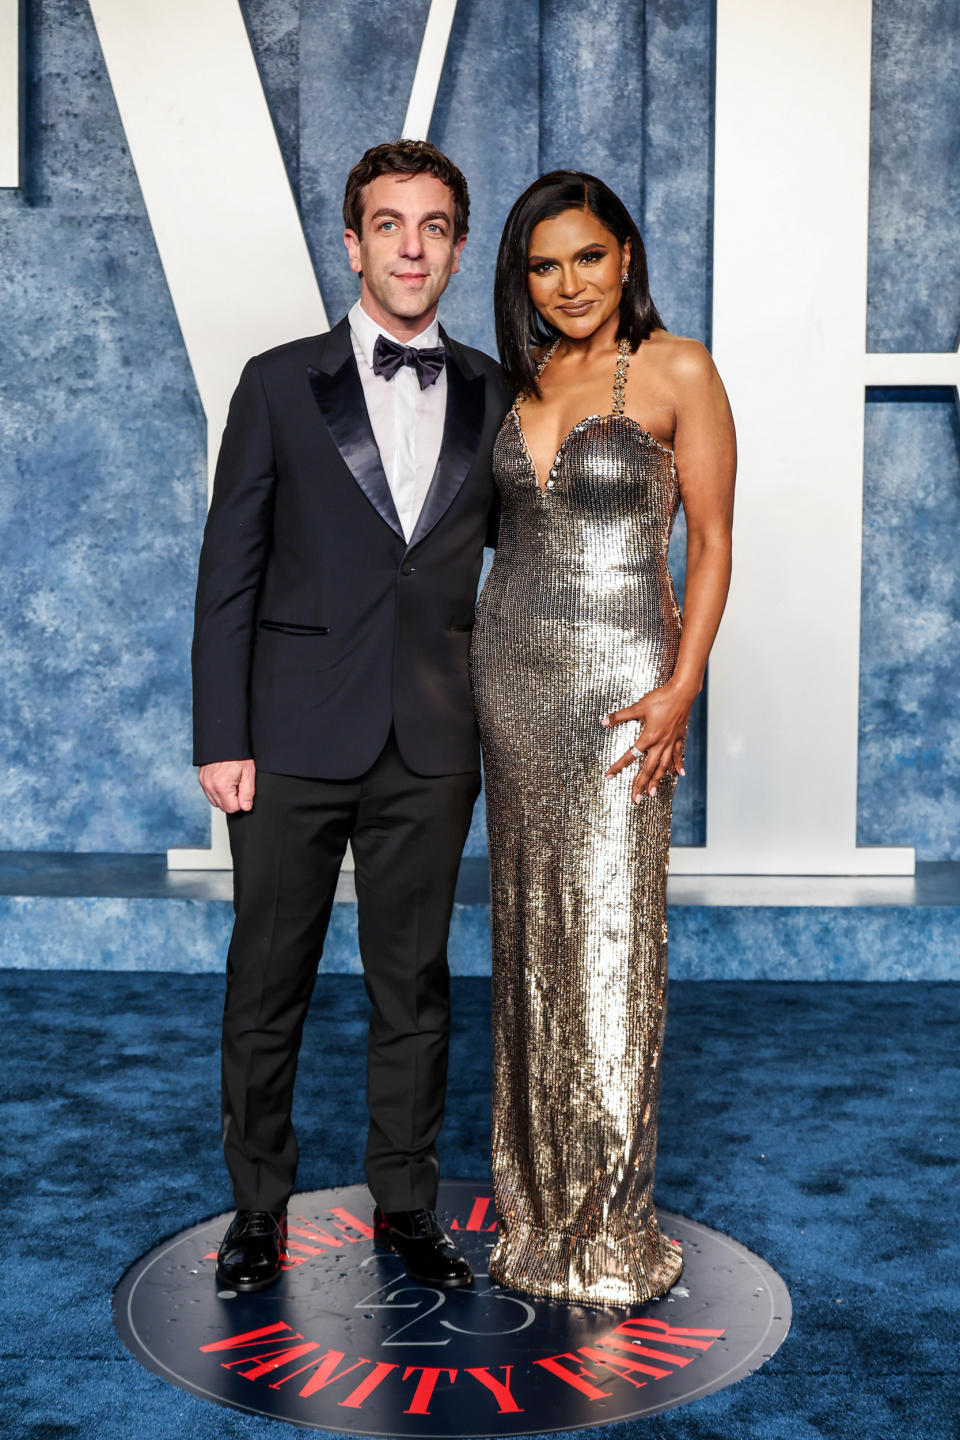 Image: B.J. Novak and Mindy Kaling attend the 2023 Vanity Fair Oscar Party Hosted By Radhika Jones at Wallis Annenberg Center for the Performing Arts on March 12, 2023 in Los Angeles. (Amy Sussman / Getty Images)